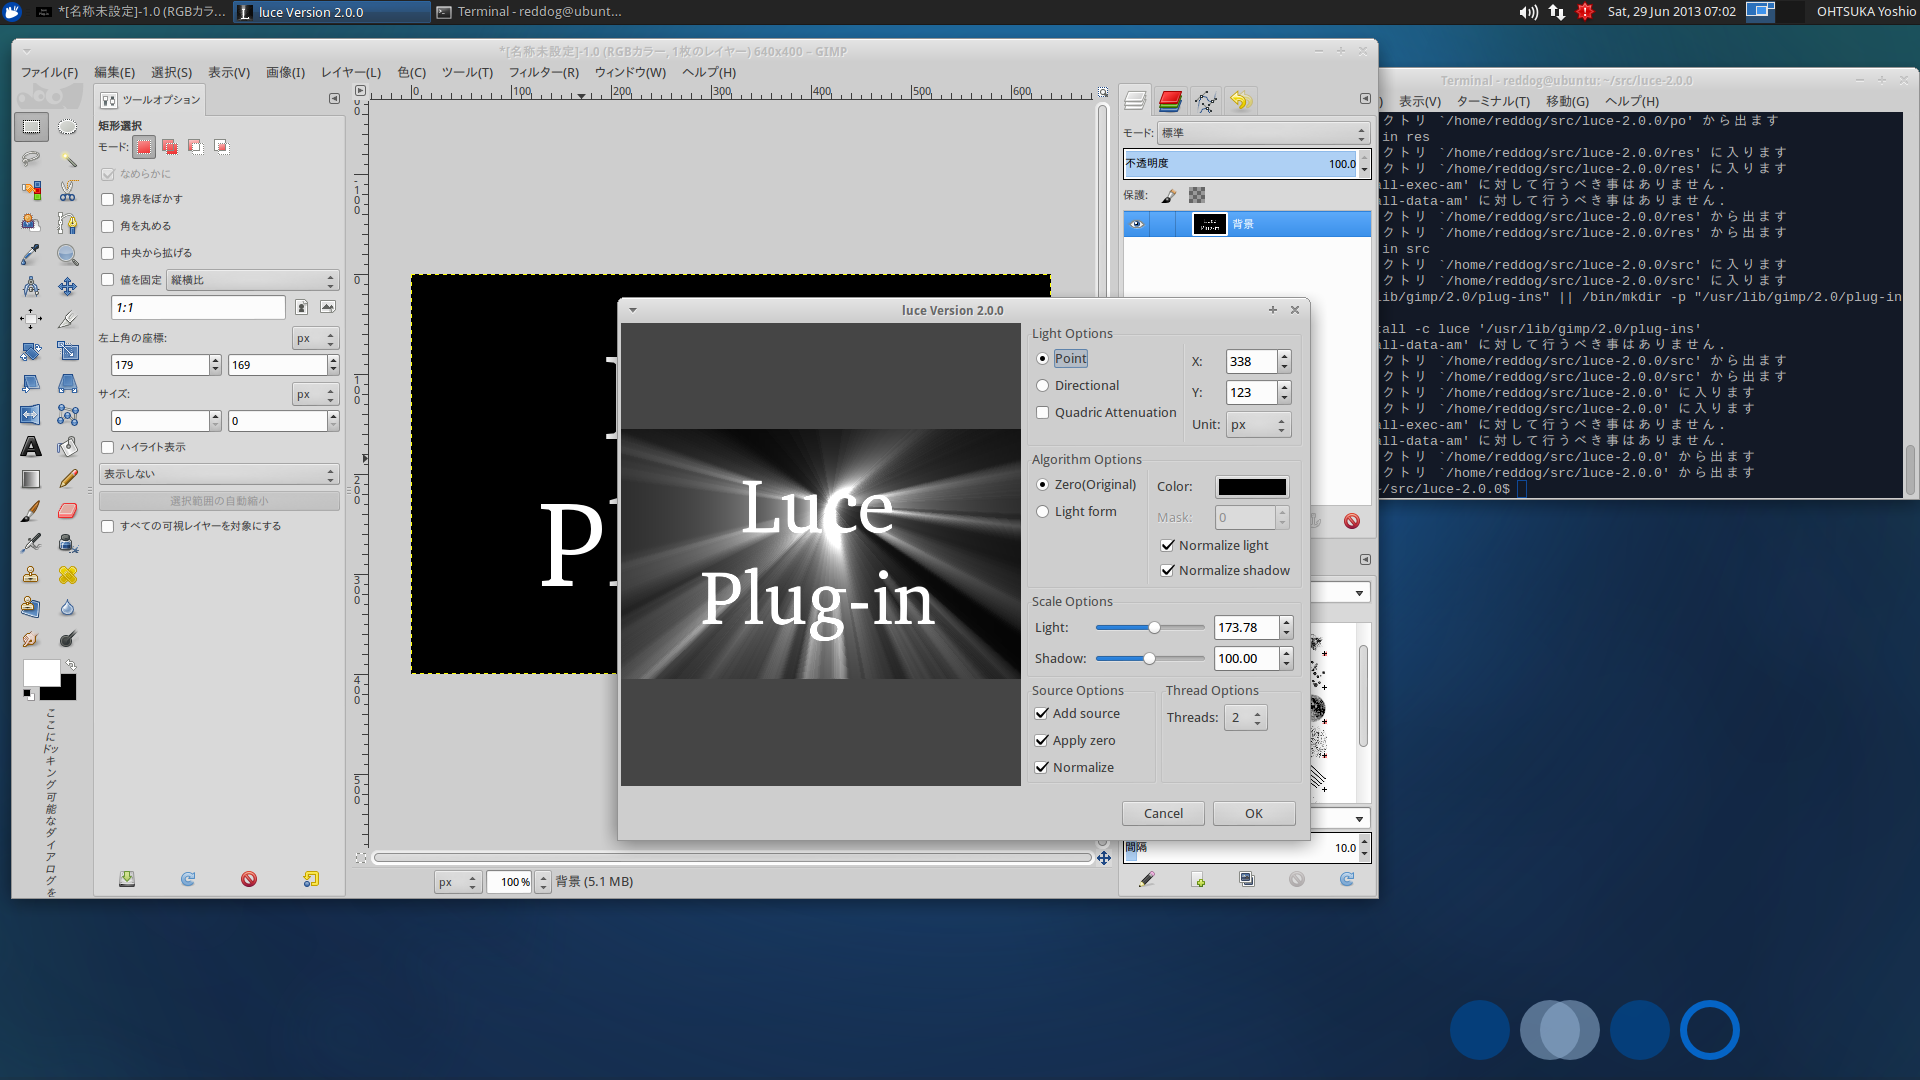 Luce on Linux